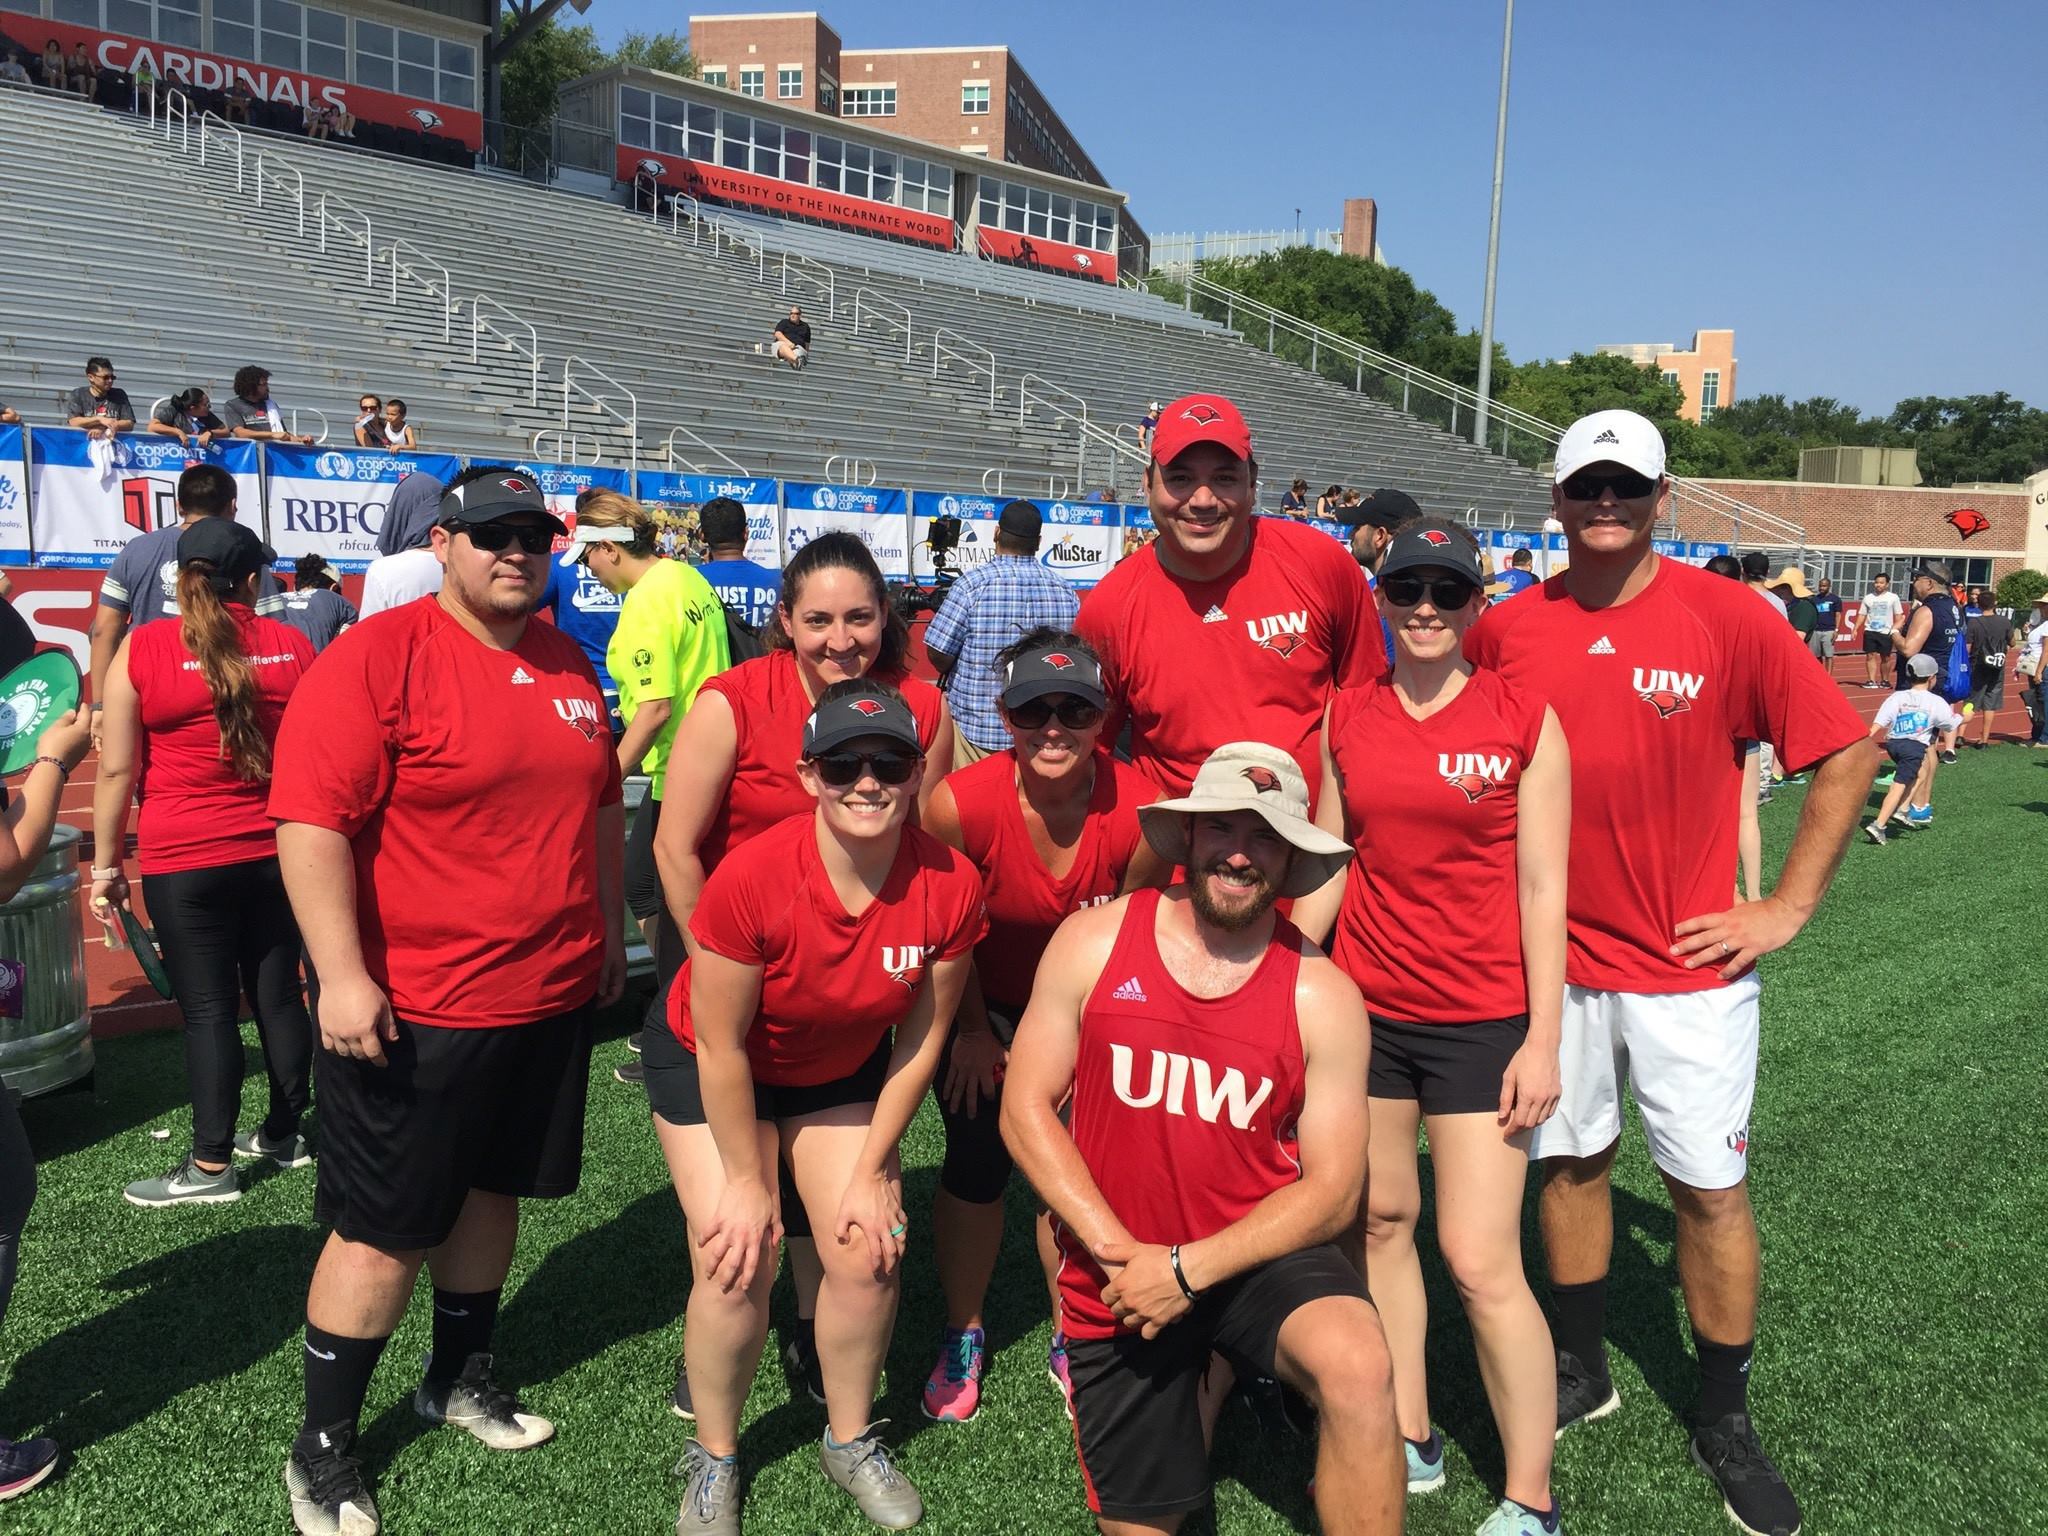 team uiw tug of war corporate cup